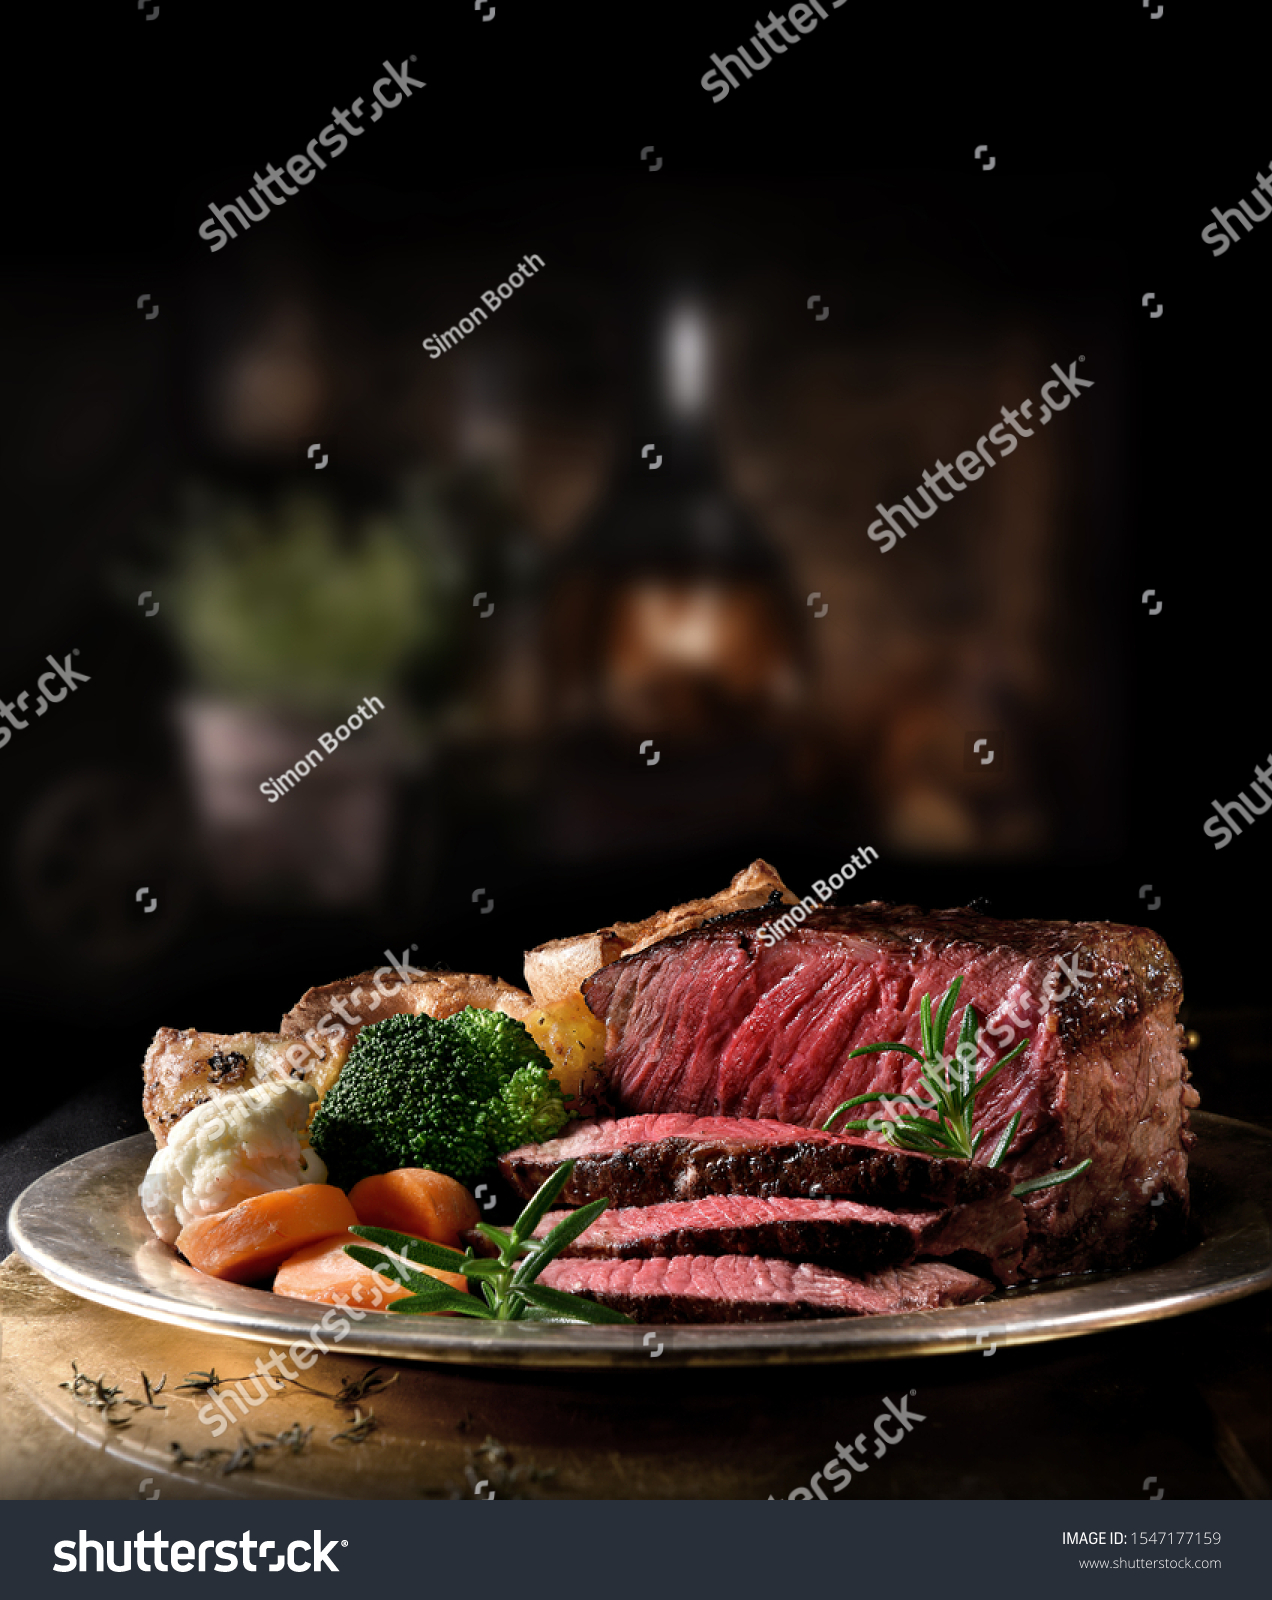 Succulent side of rare roast beef with seasonal vegetables, Yorkshire Puddings and roast potatoes with Rosemary garnish shot in a rustic setting with an old fashioned wood burner. Copy space. #1547177159